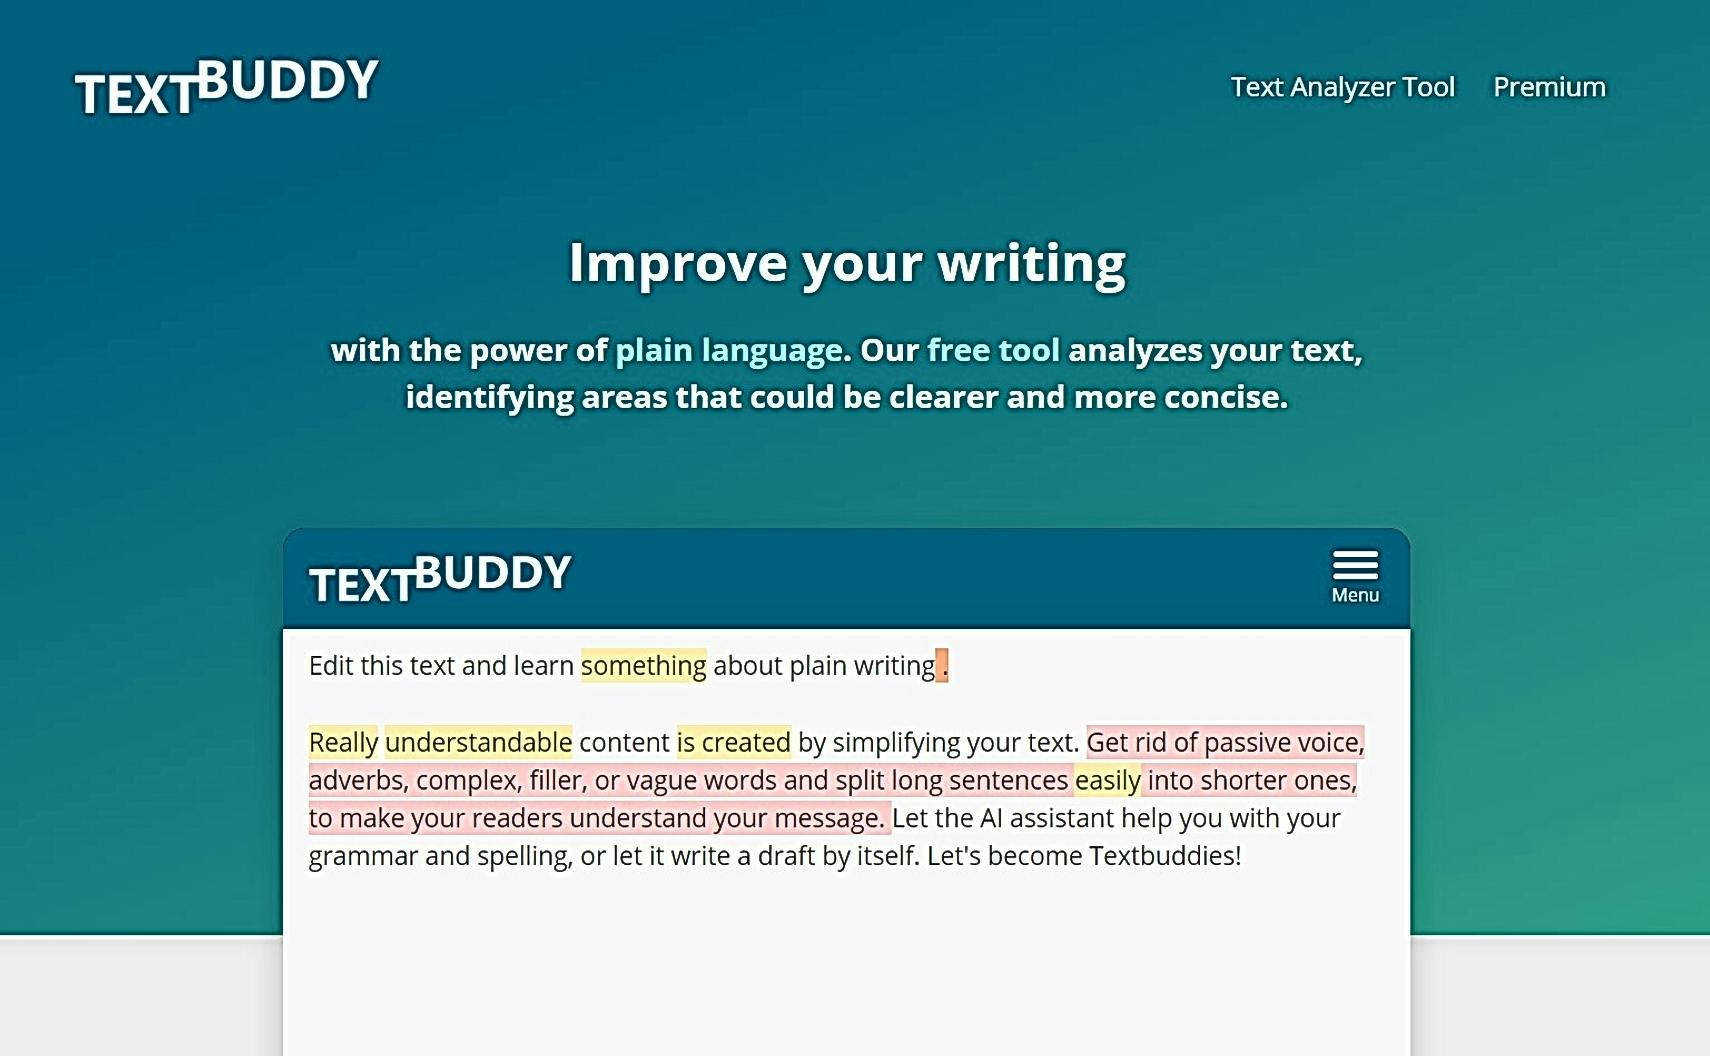 TextBuddy featured